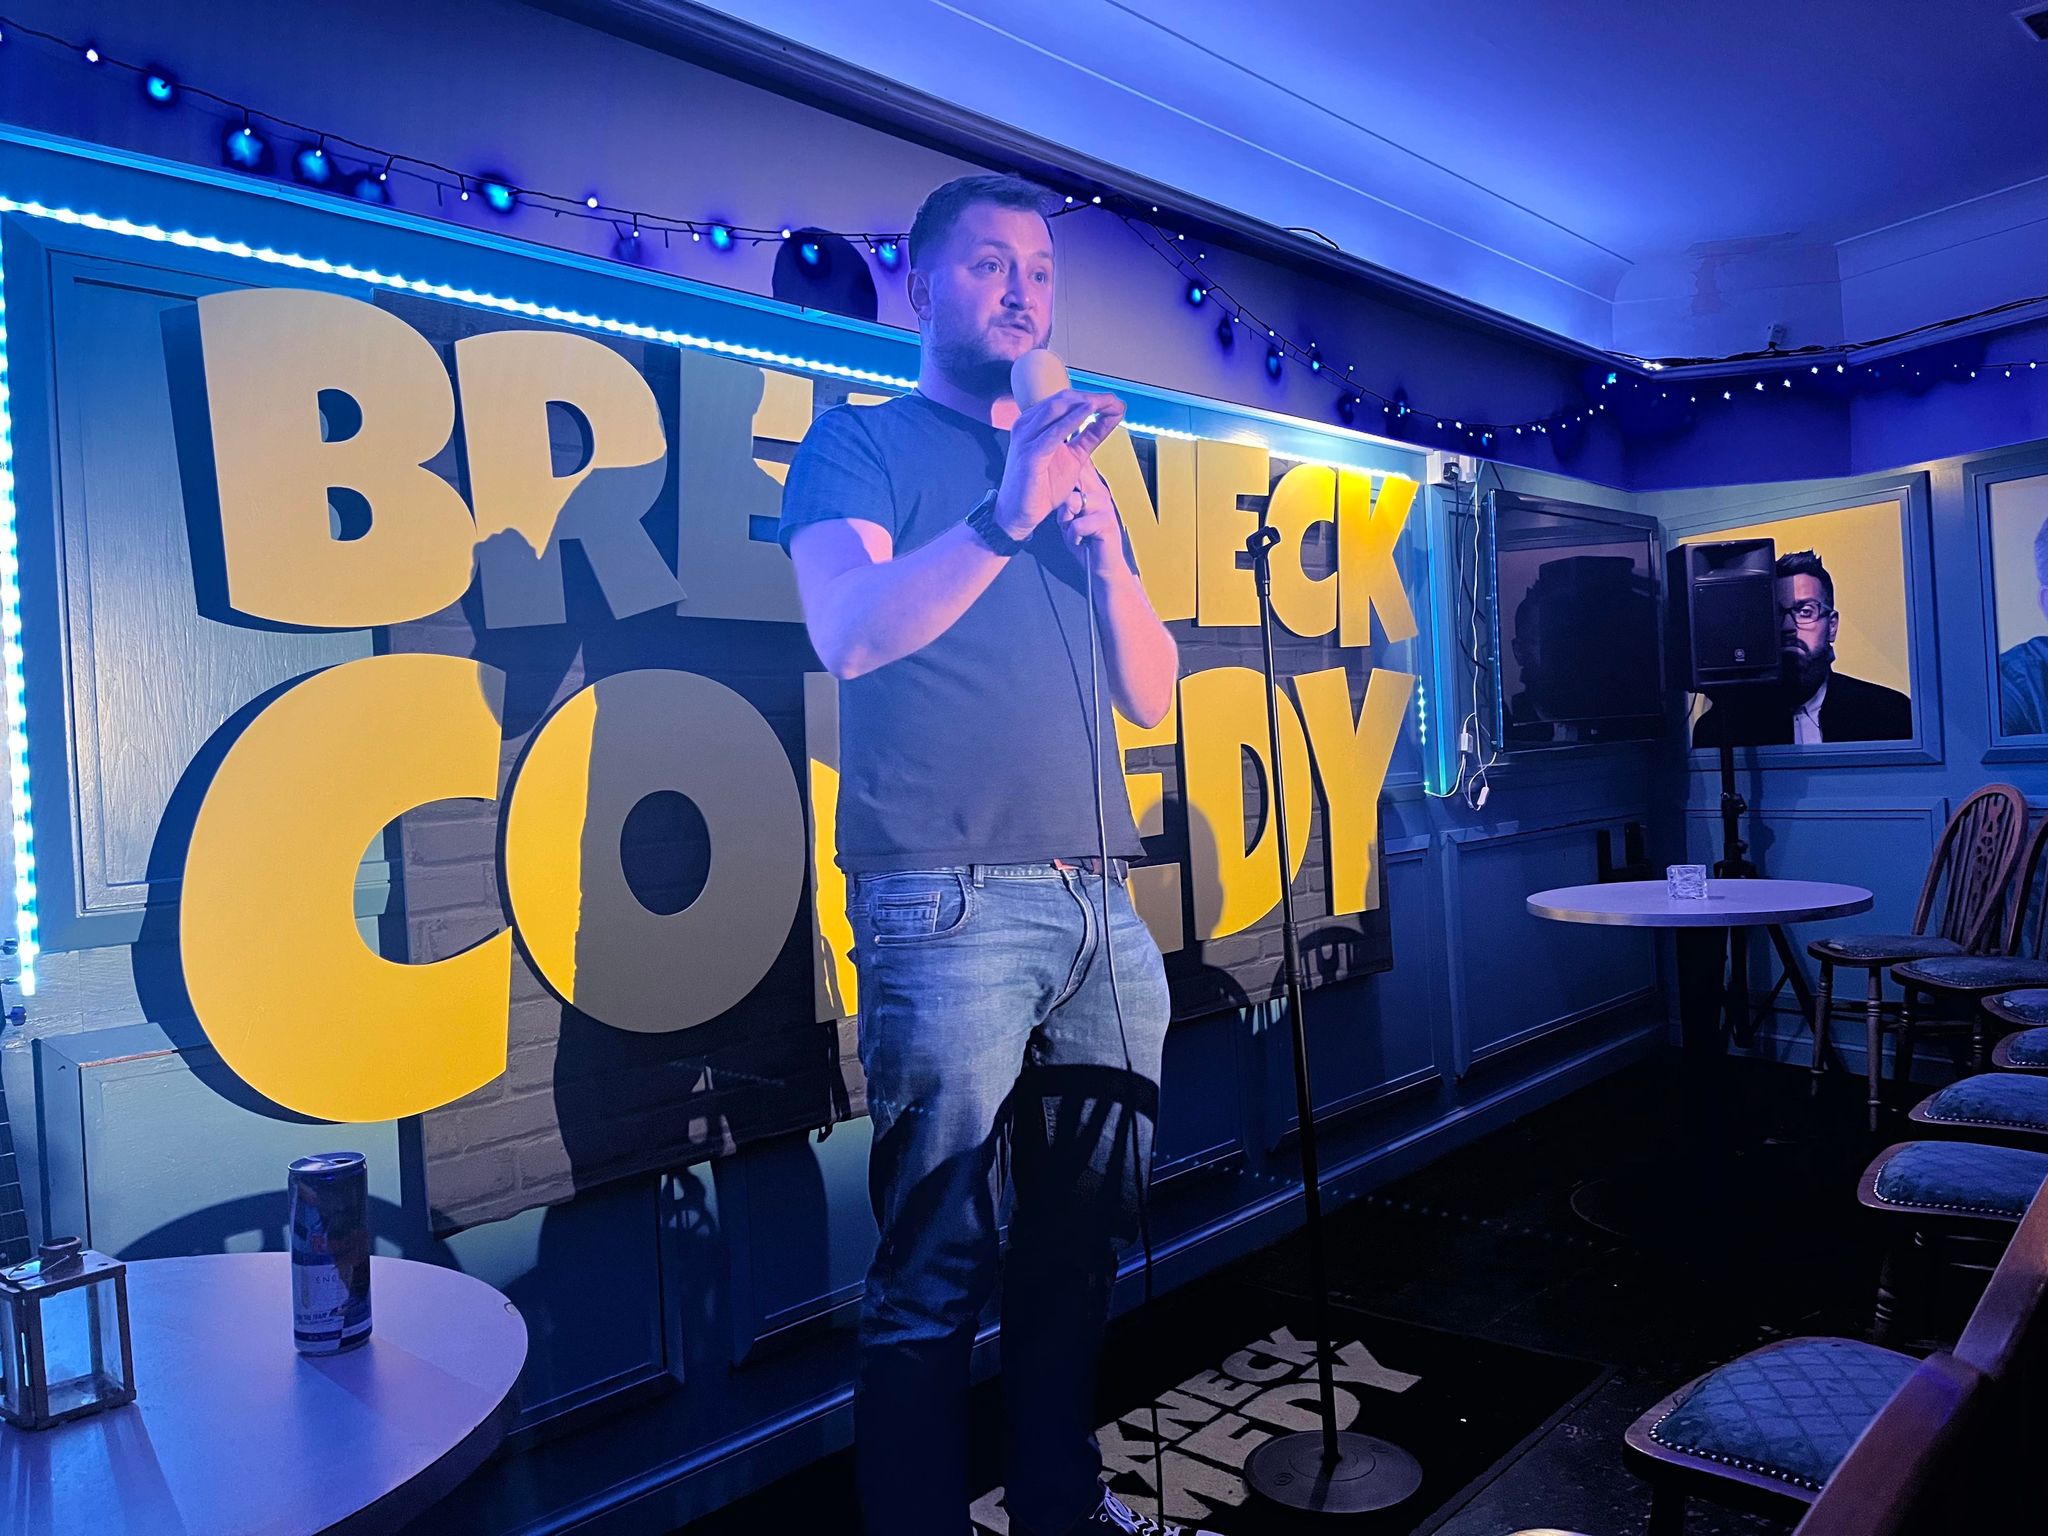 Dave Wandless performing in front of a large, yellow Breakneck Comedy sign